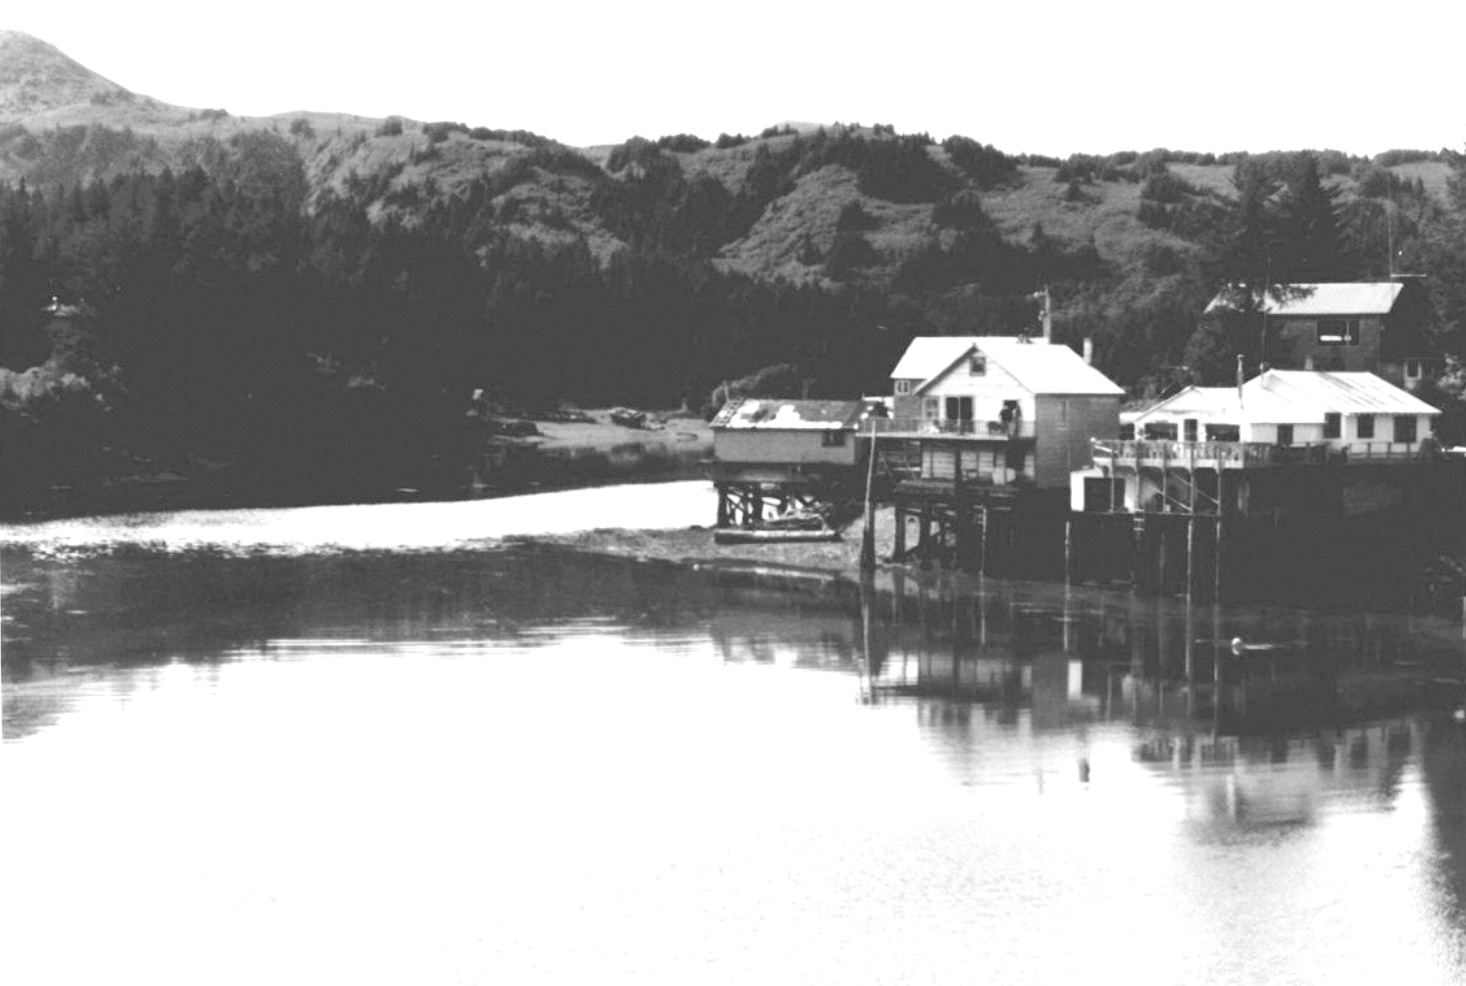 Houses and other buildings on piers above the bay and the start of the slough